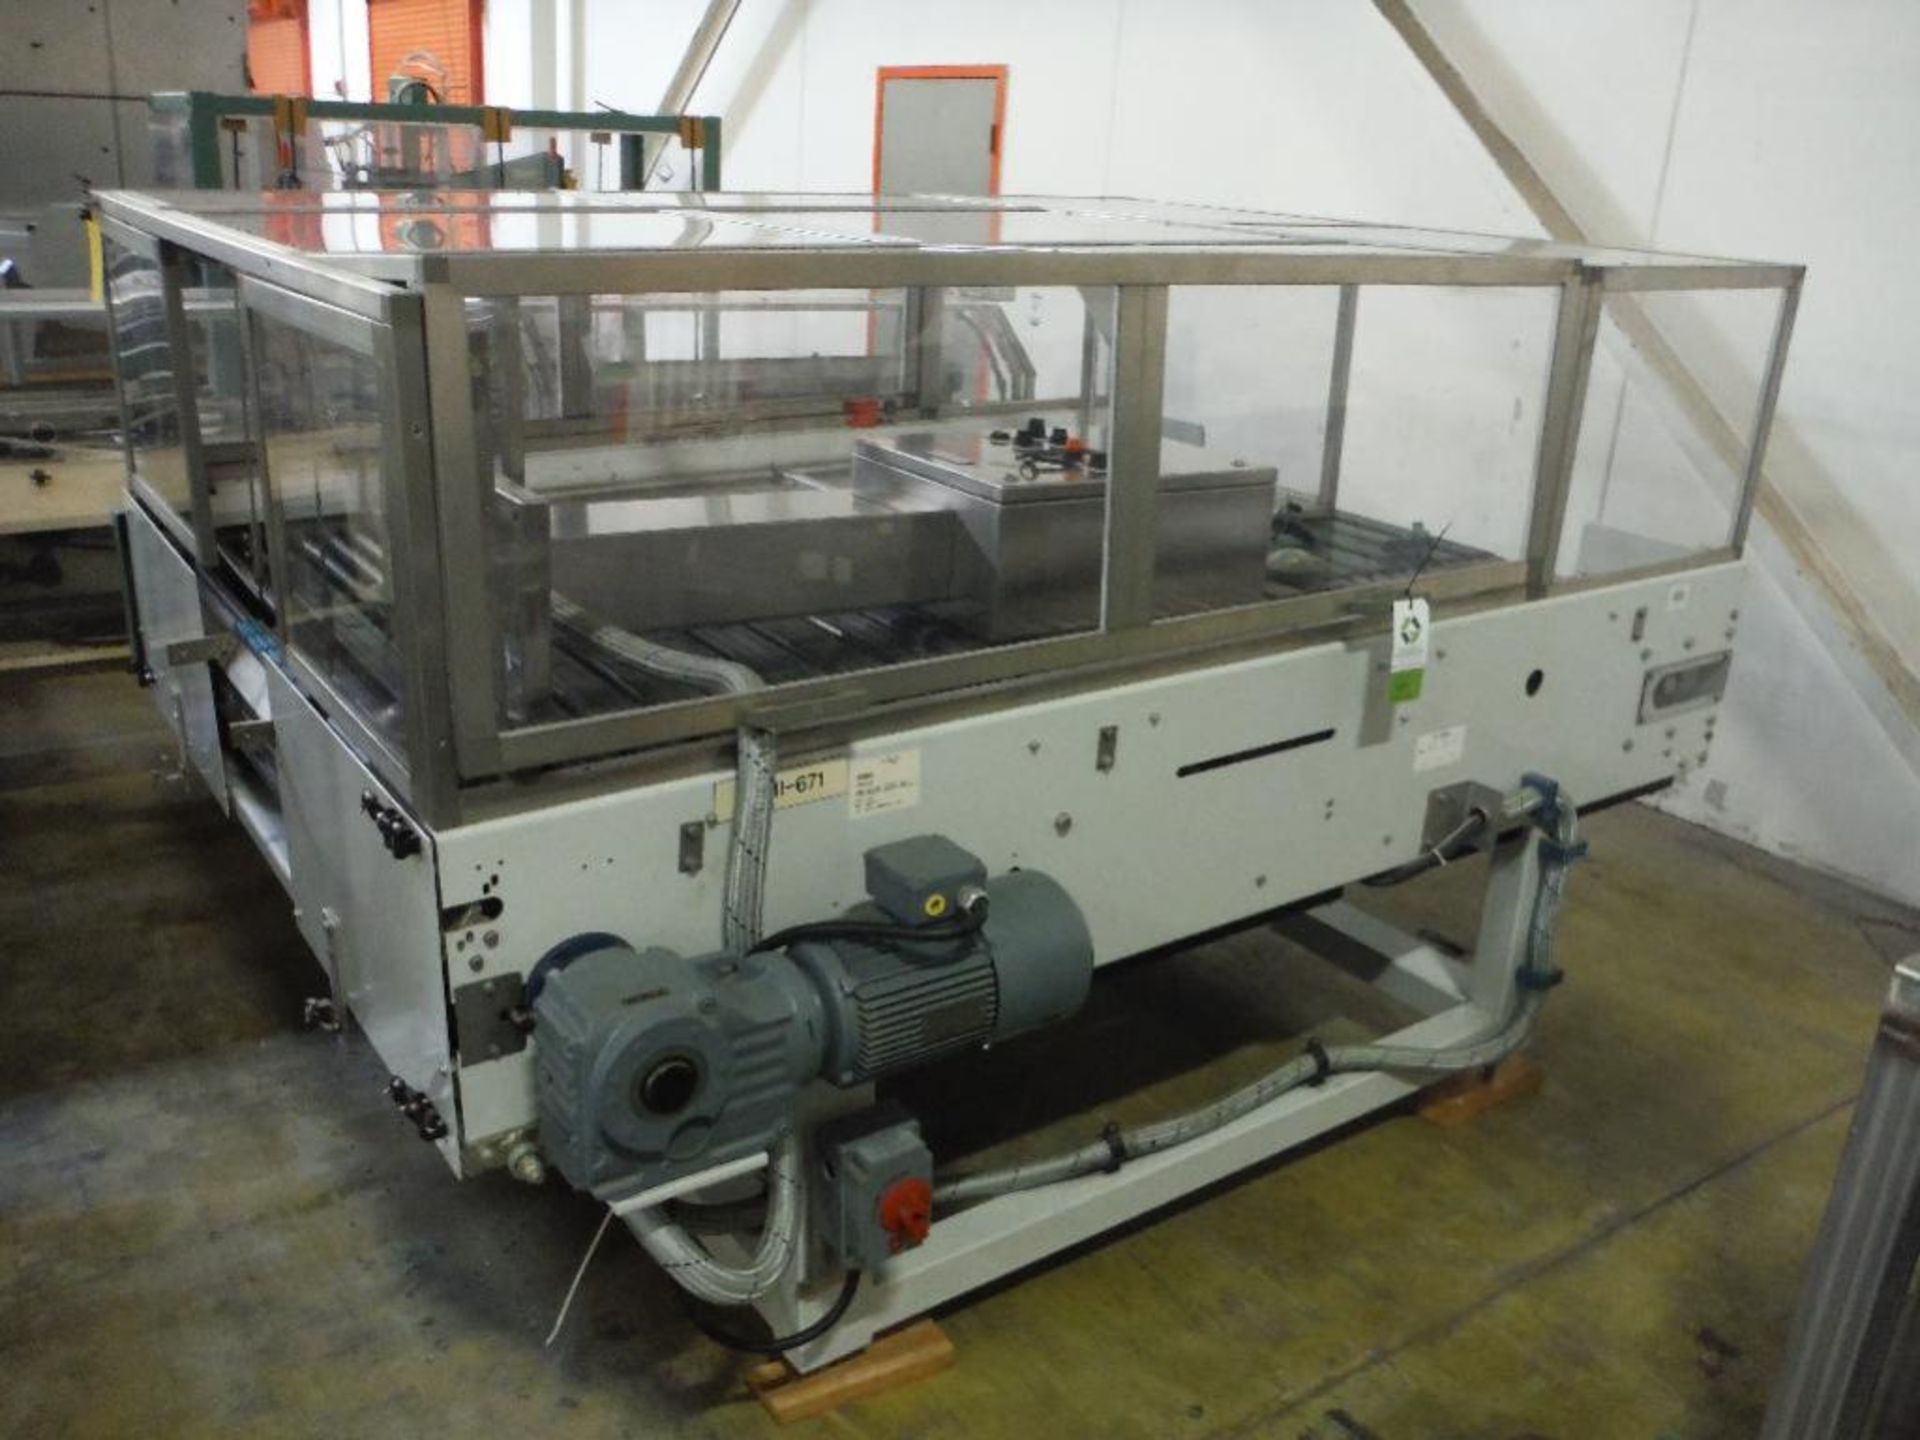 2007 Sidel combiner conveyor, Model TDC0015, SN 904835-SMMM0327, 98 in. long x 66 in. wide, with con